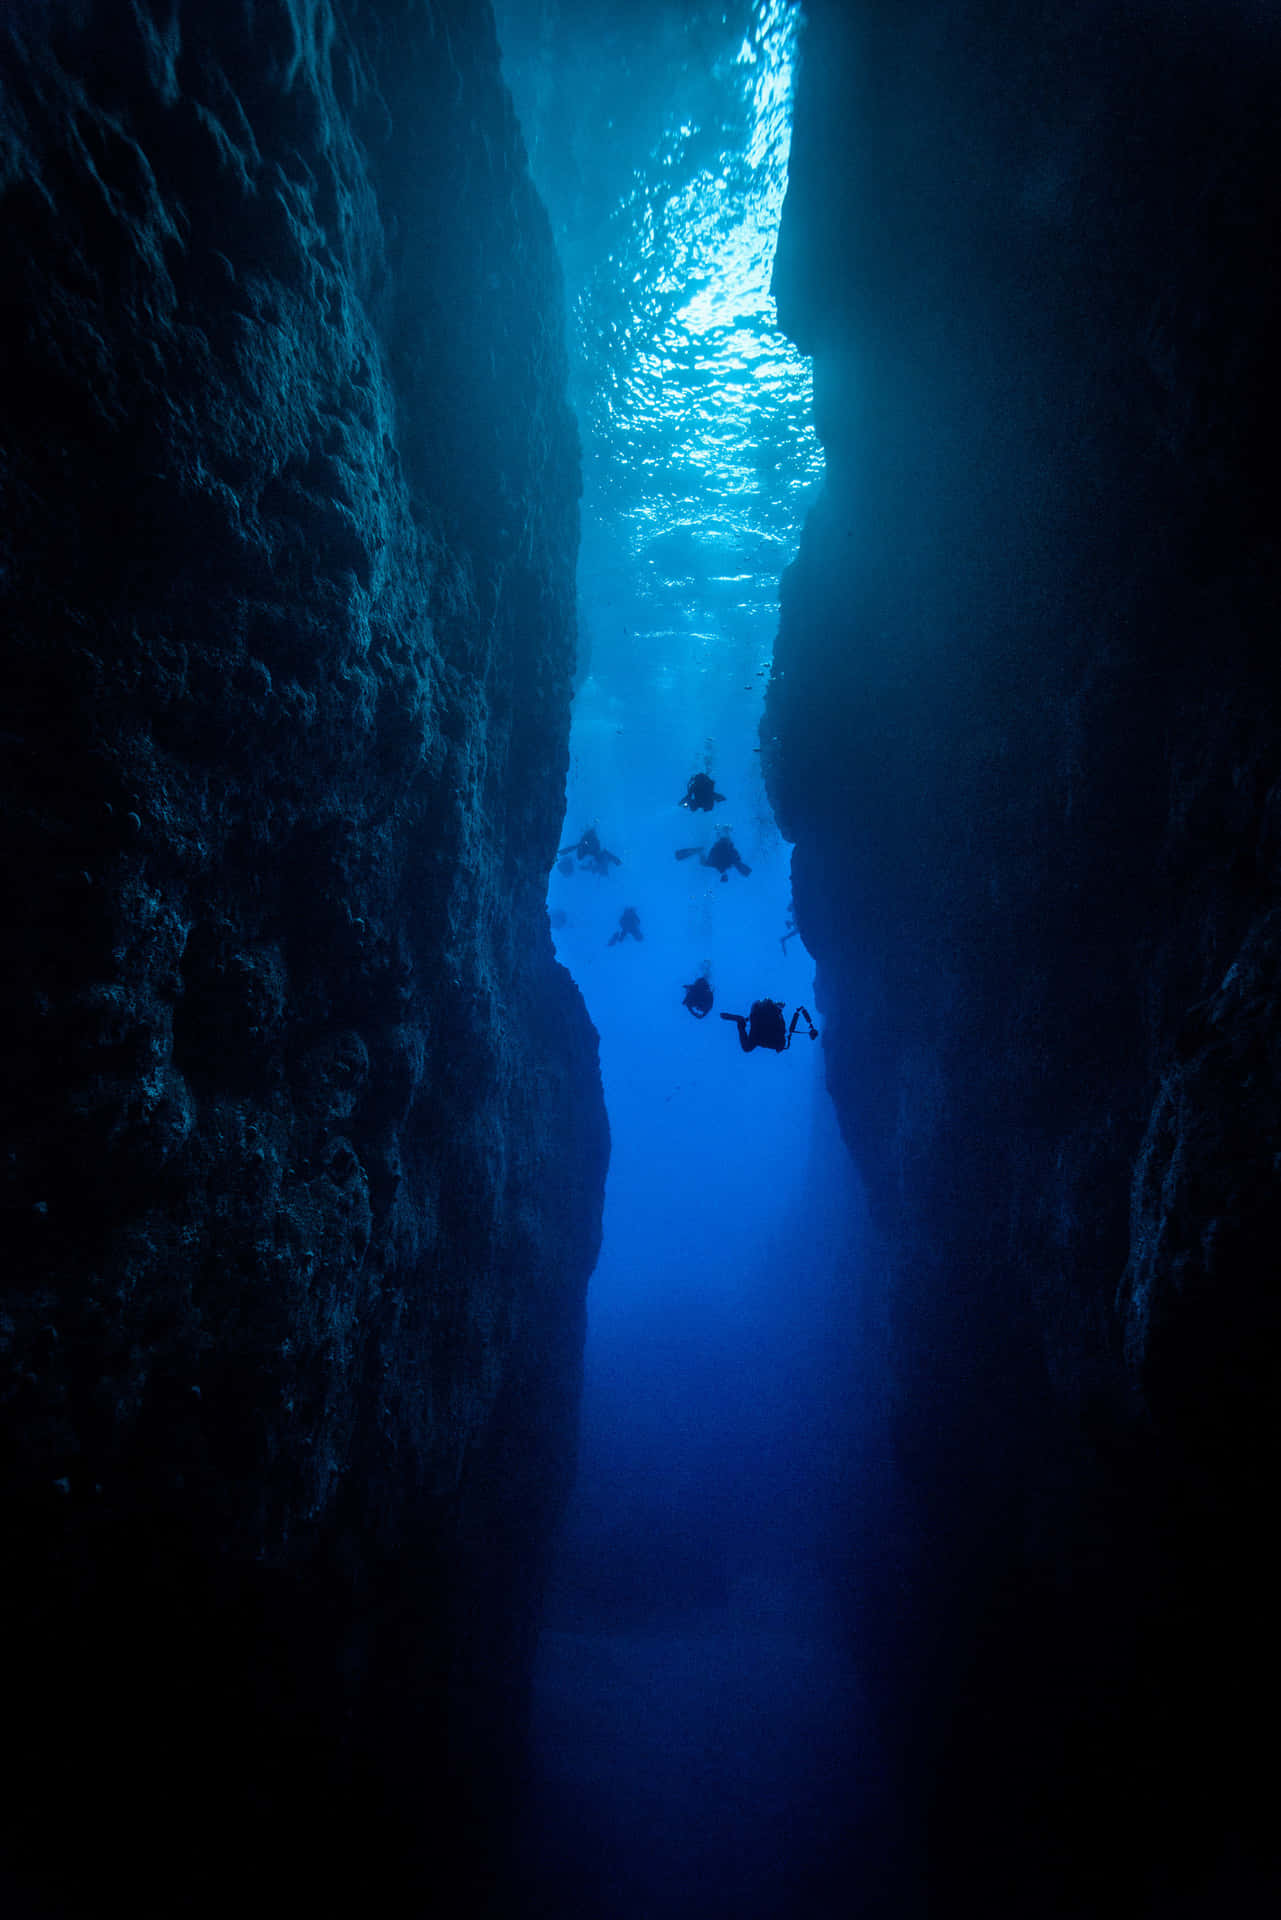 Explore the mysterious undiscovered depths of the ocean